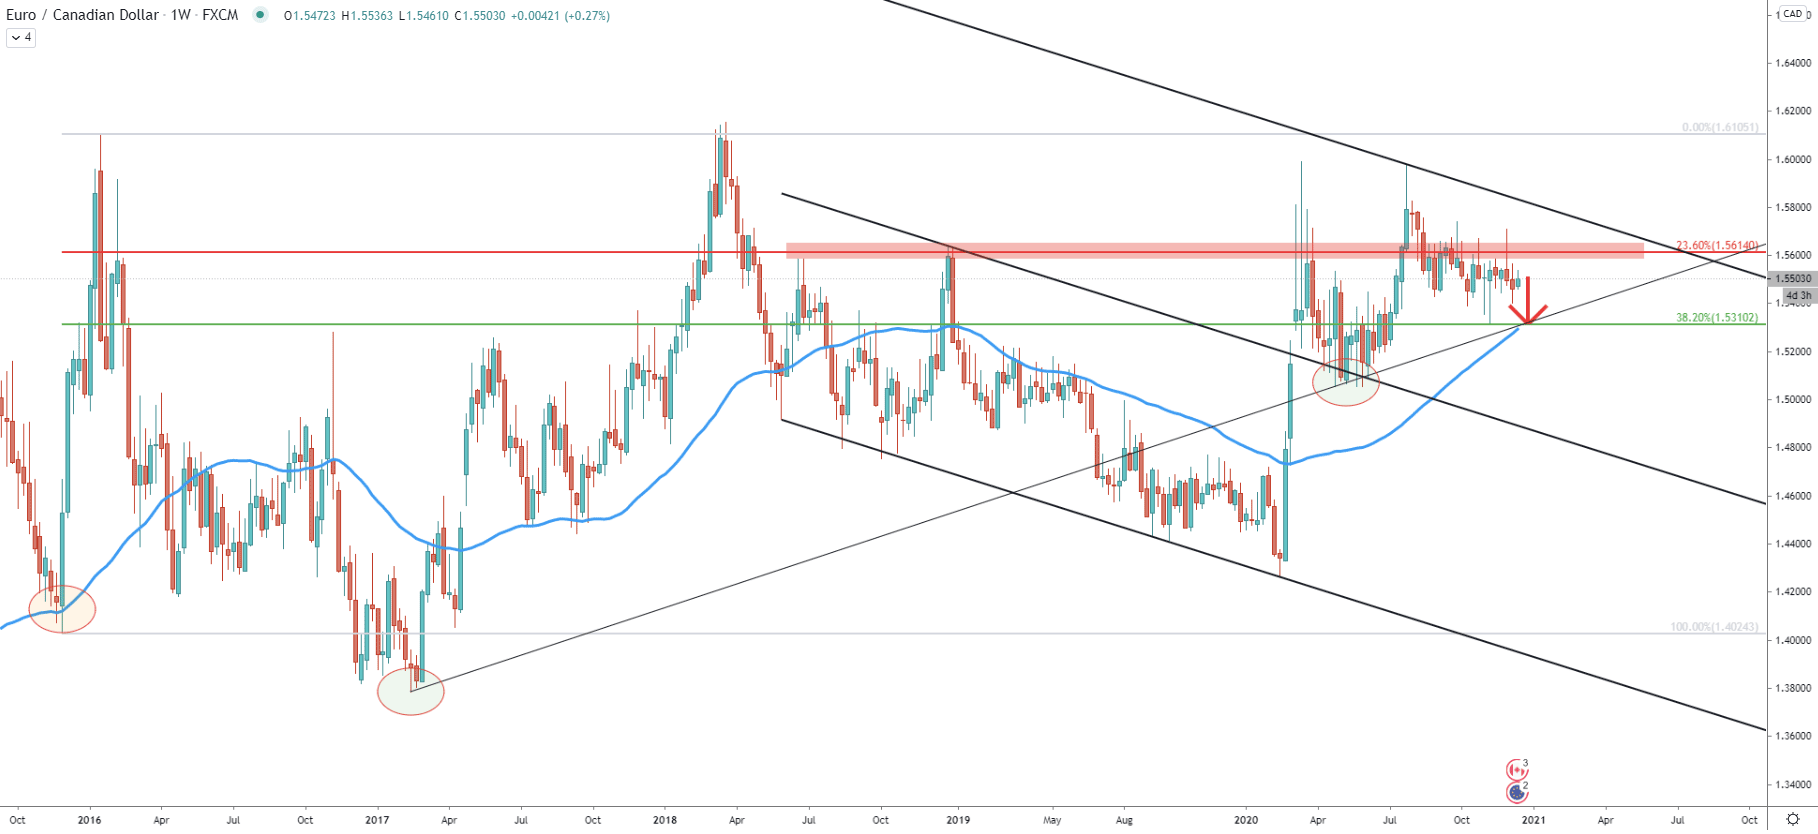 EUR/CAD Weekly Technical Analysis 14 Dec 2020